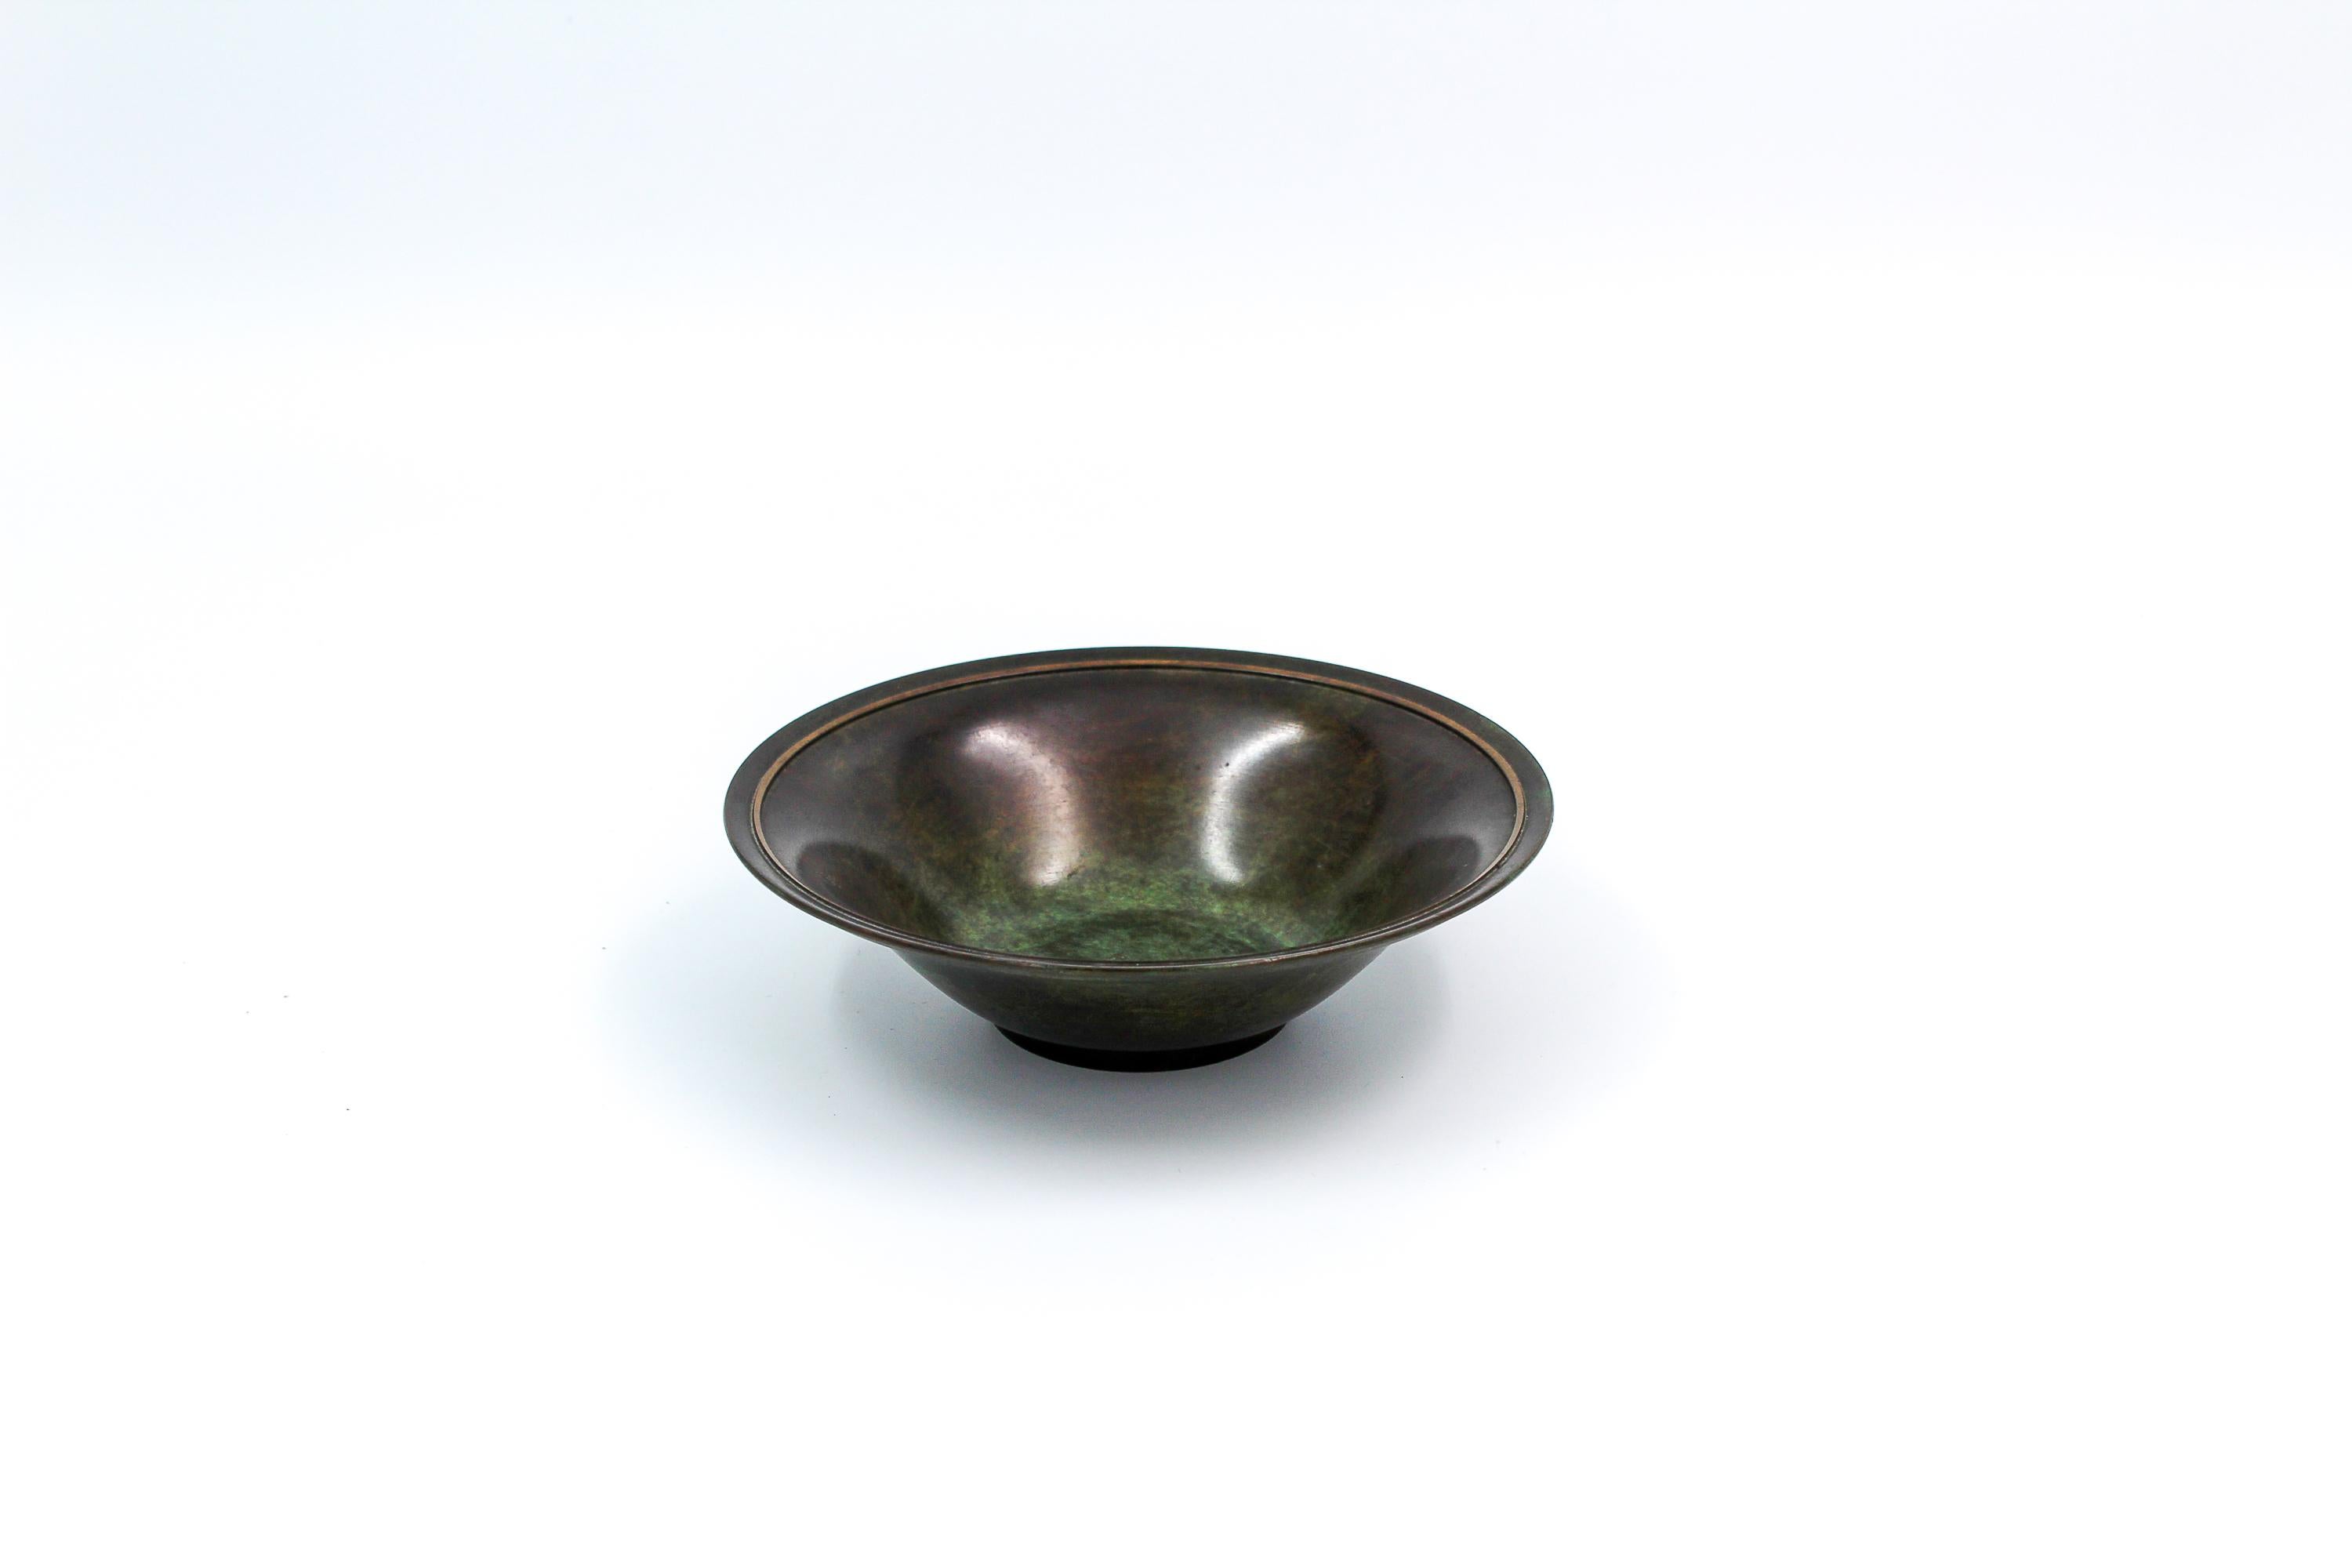 A 1930s bronze Art Deco bowl by Swedish manufacturer GAB. Very good vintage condition with patina.